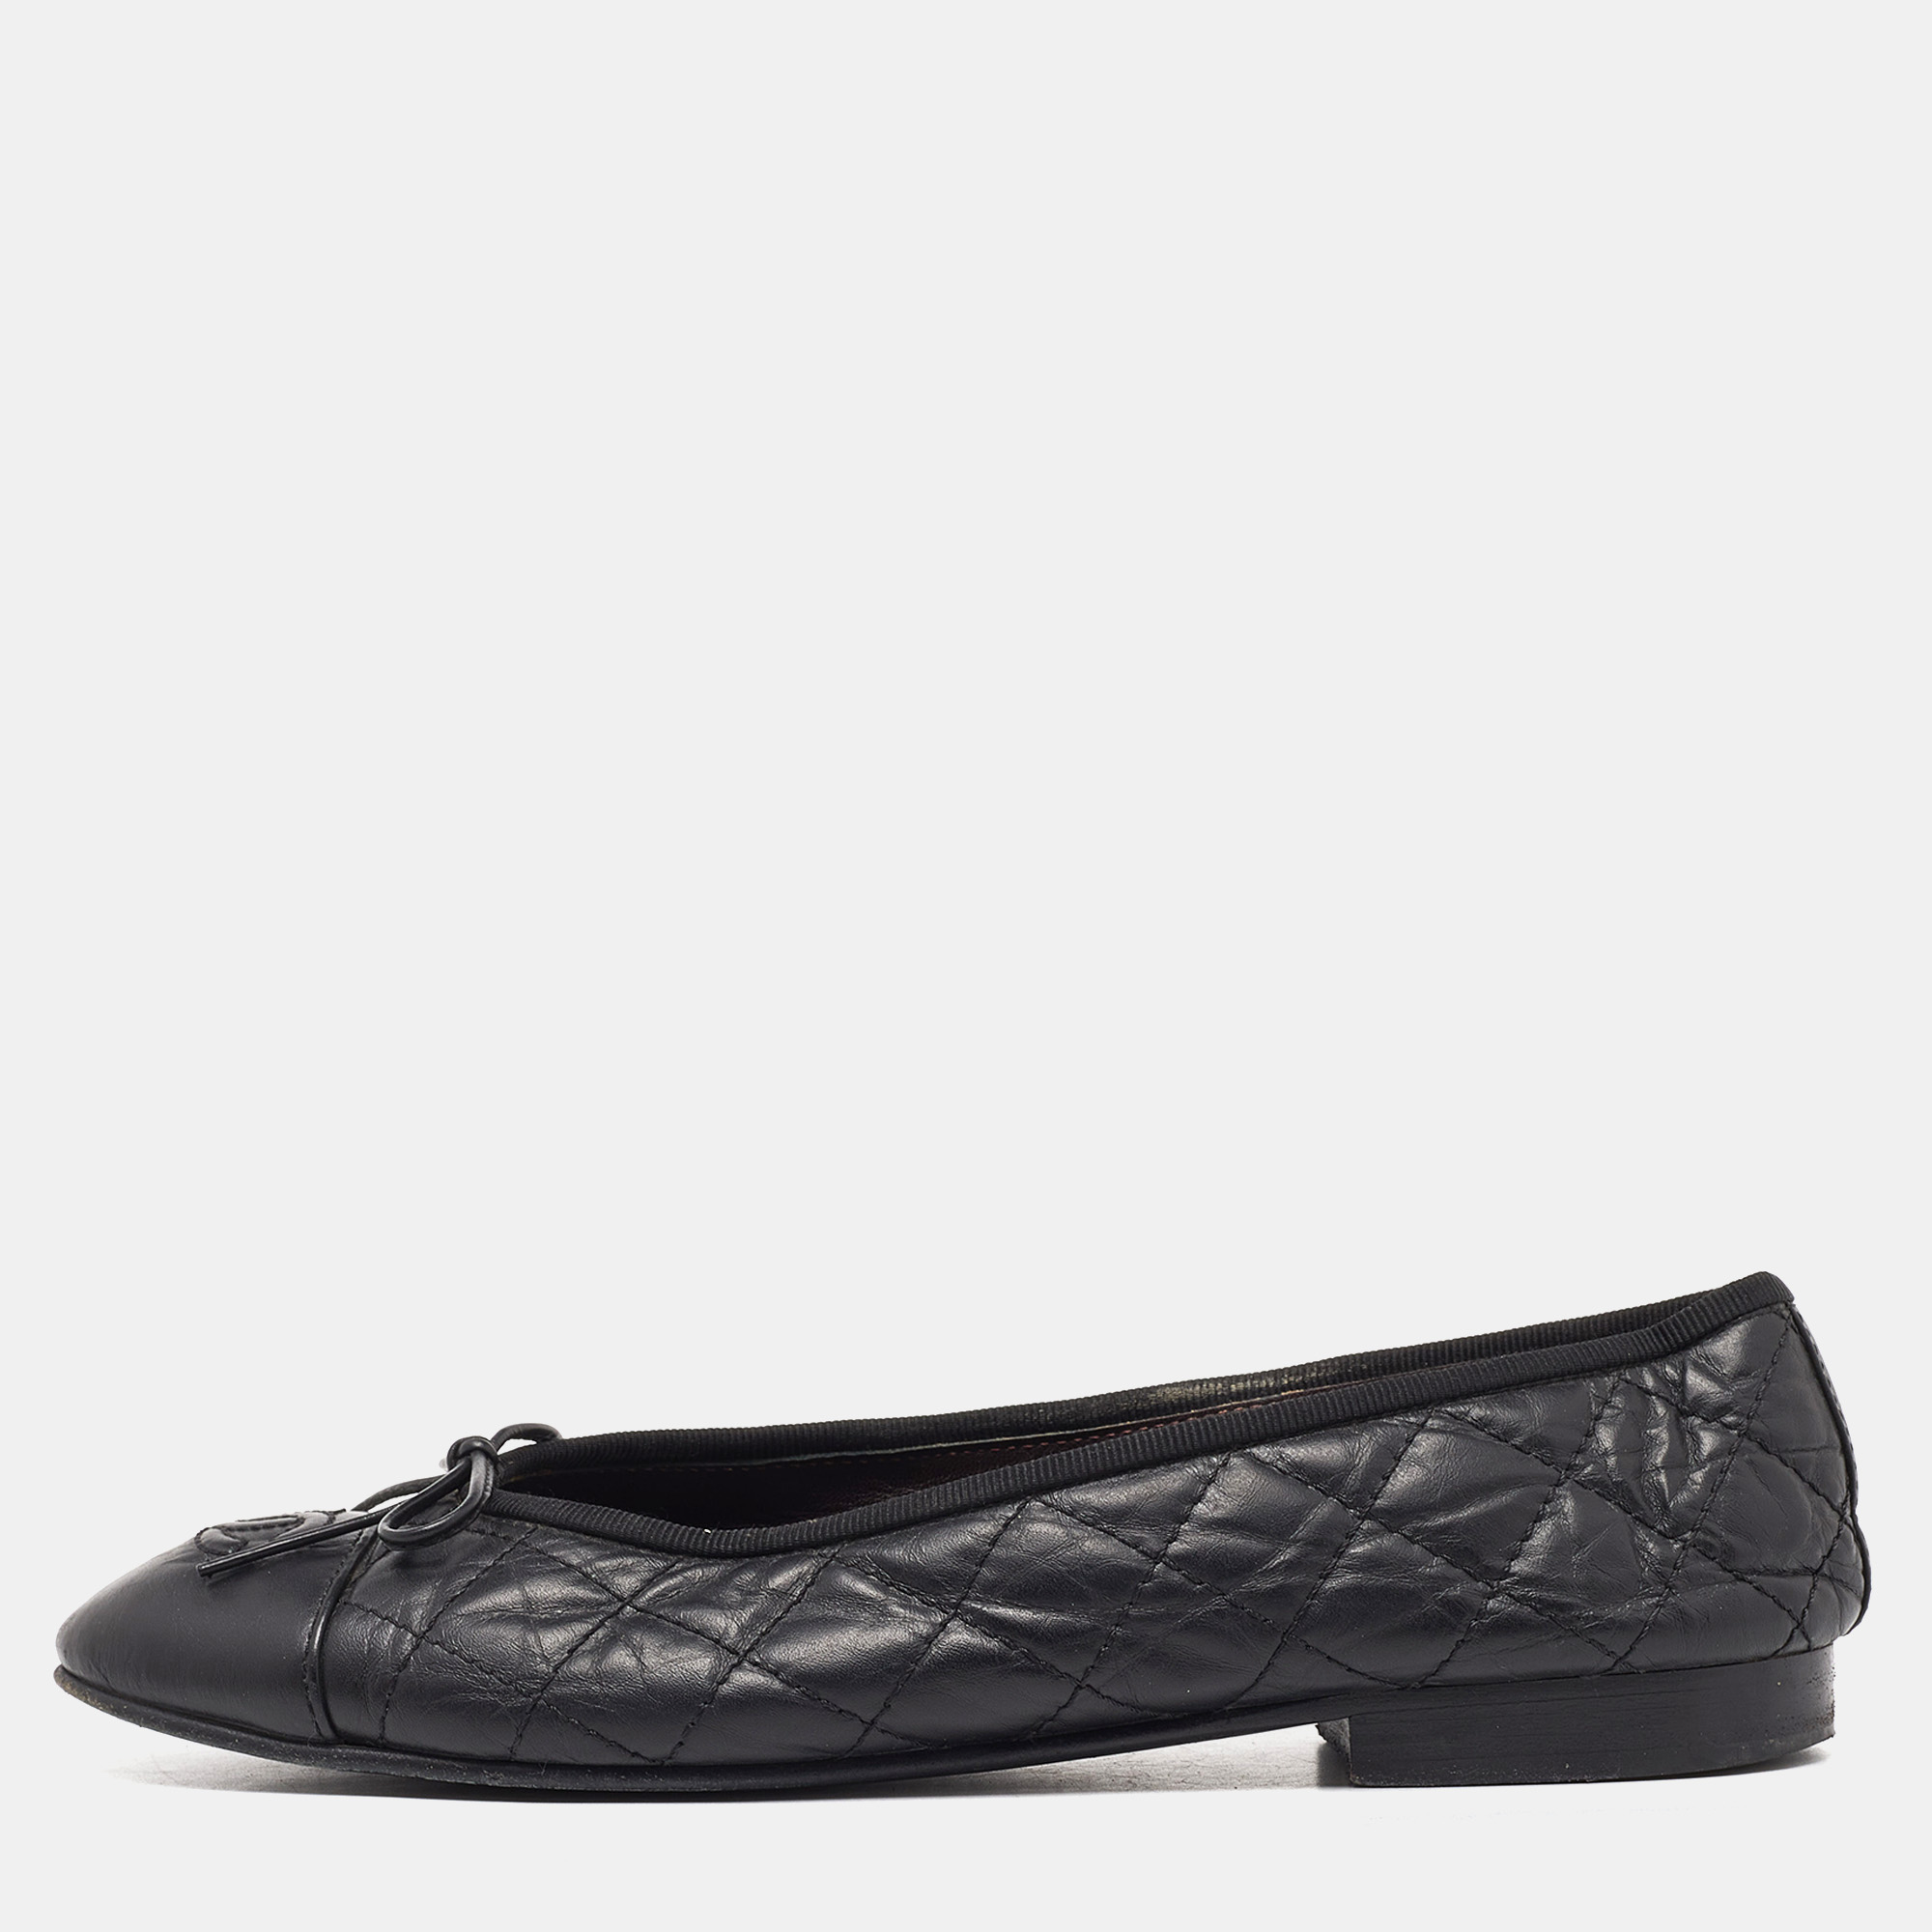 Chanel black quilted leather cc bow cap toe ballet flats size 38